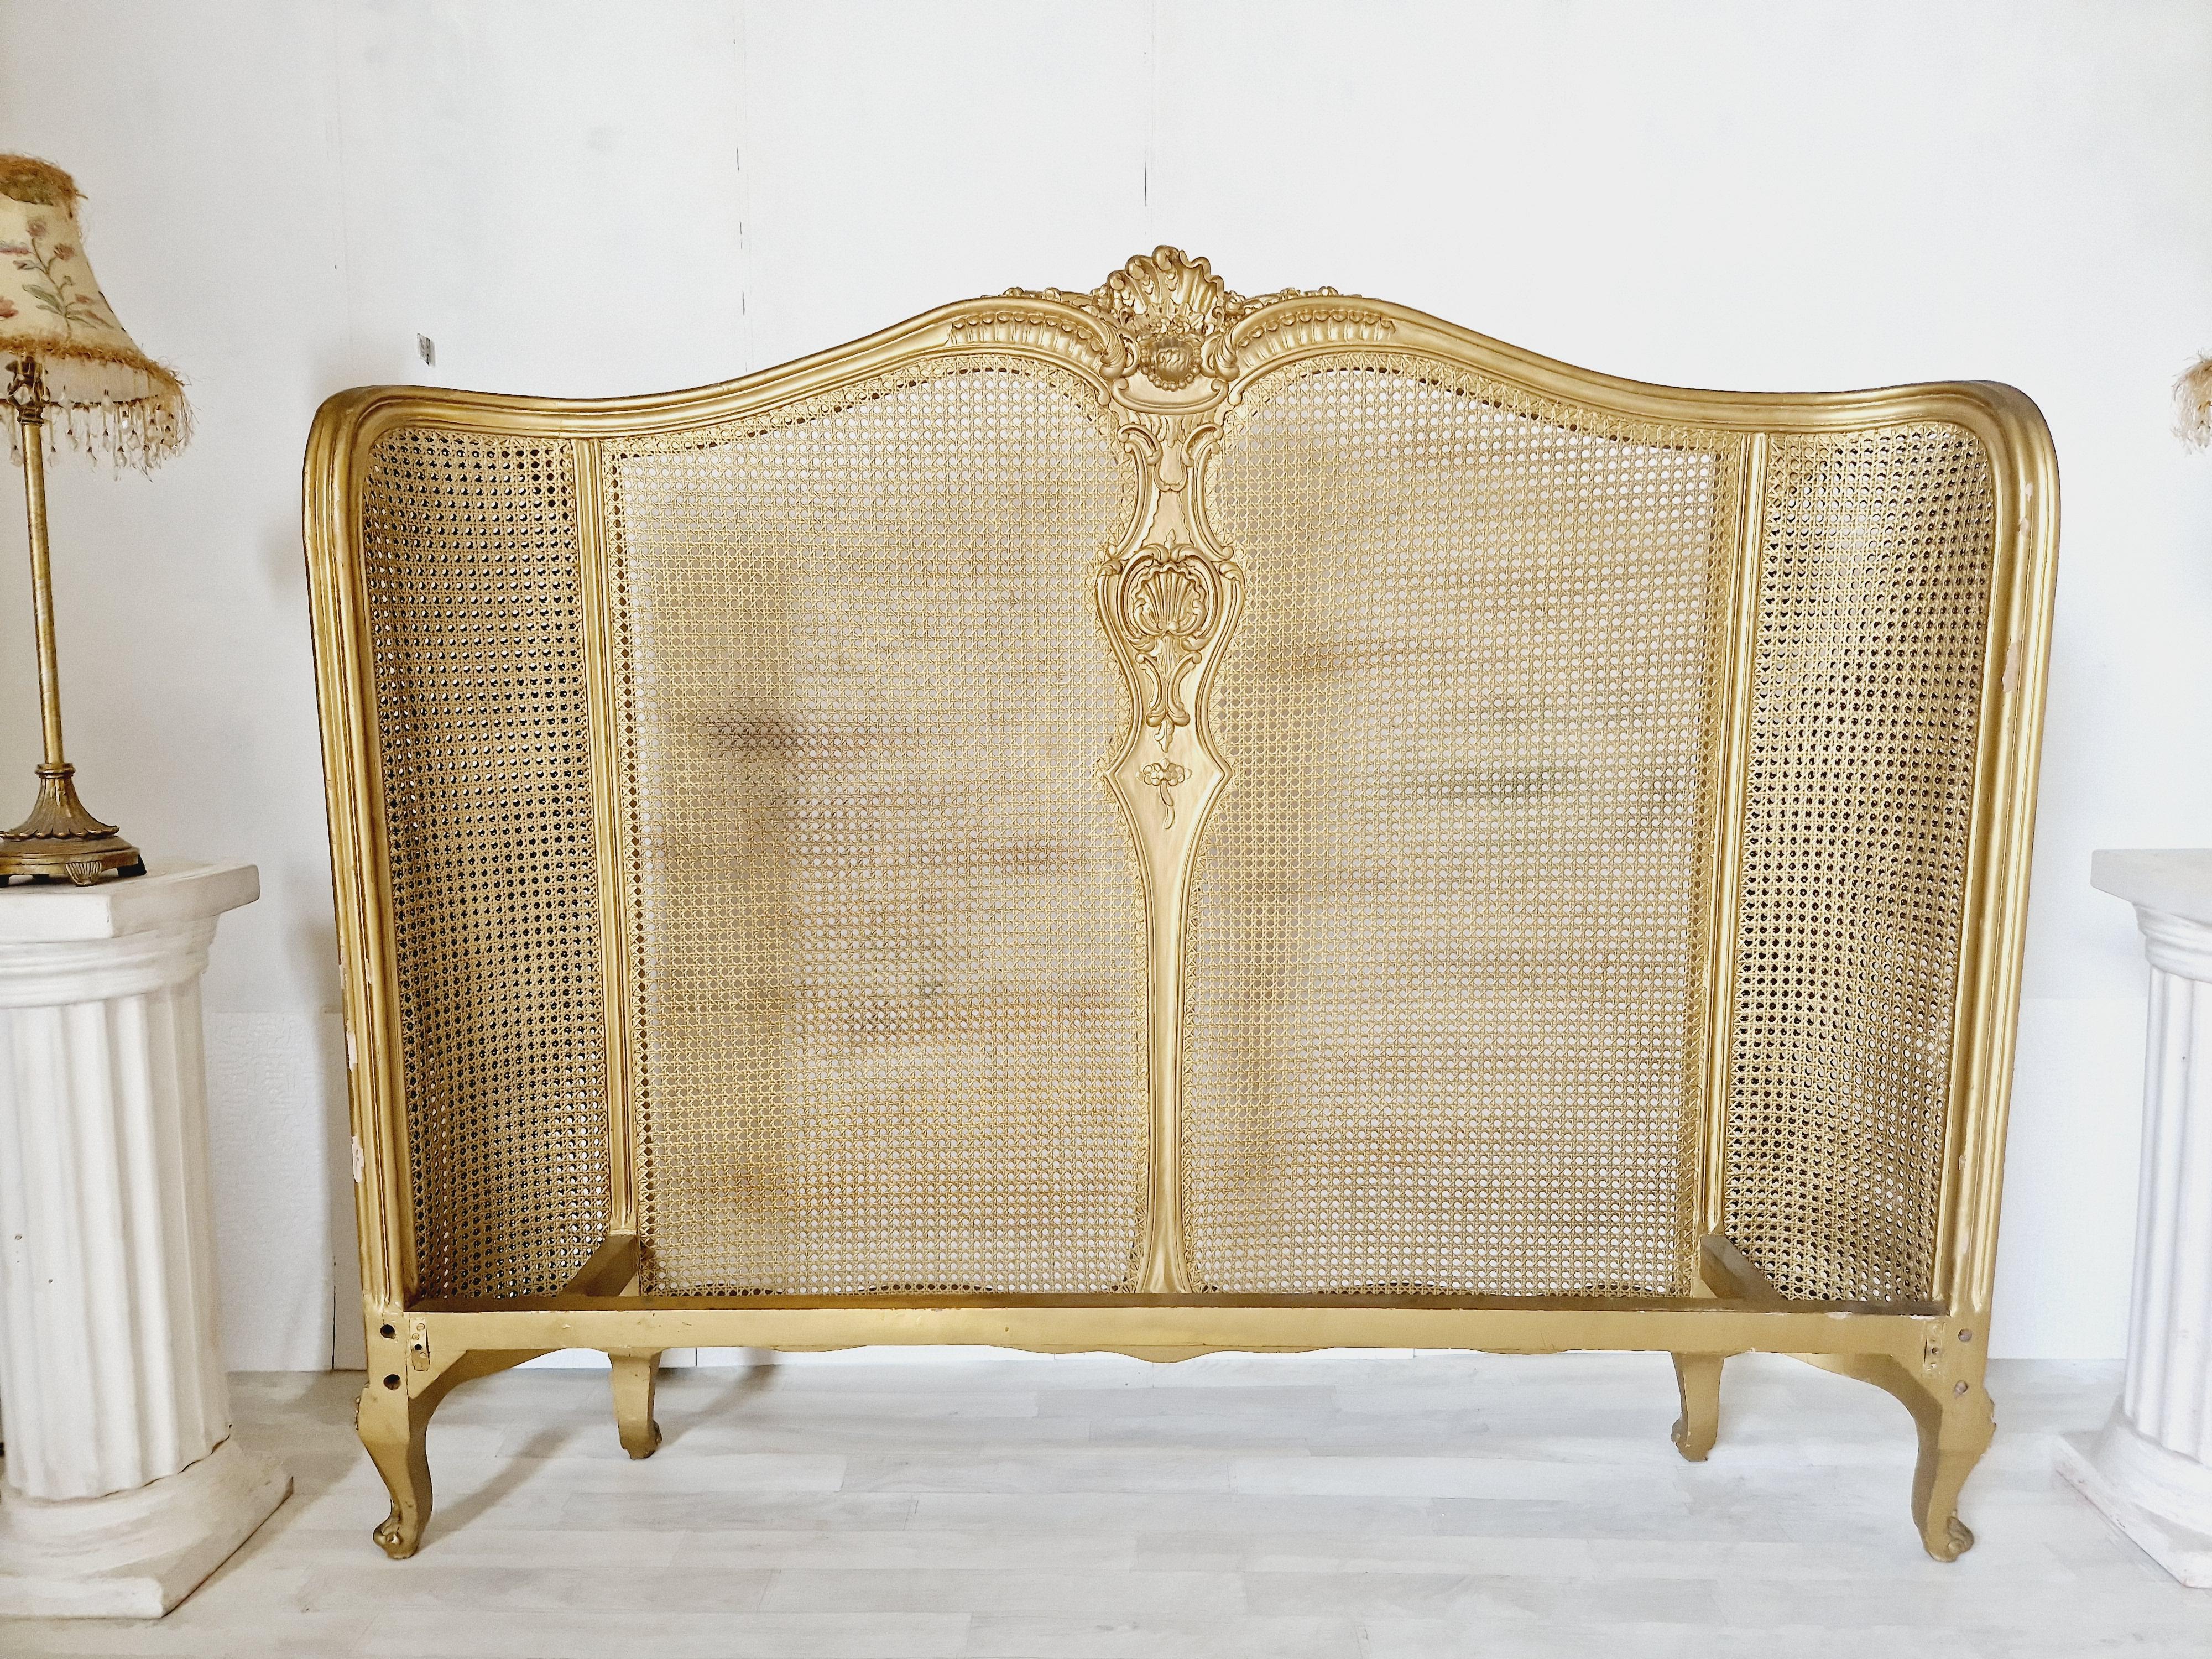 This French Cane Bed in the Louis XV style is a beautiful addition to any bedroom. The bed frame is made of high-quality wood and features intricate carvings that create a stunning visual effect. The gold lacquer finish gives the bed a luxurious